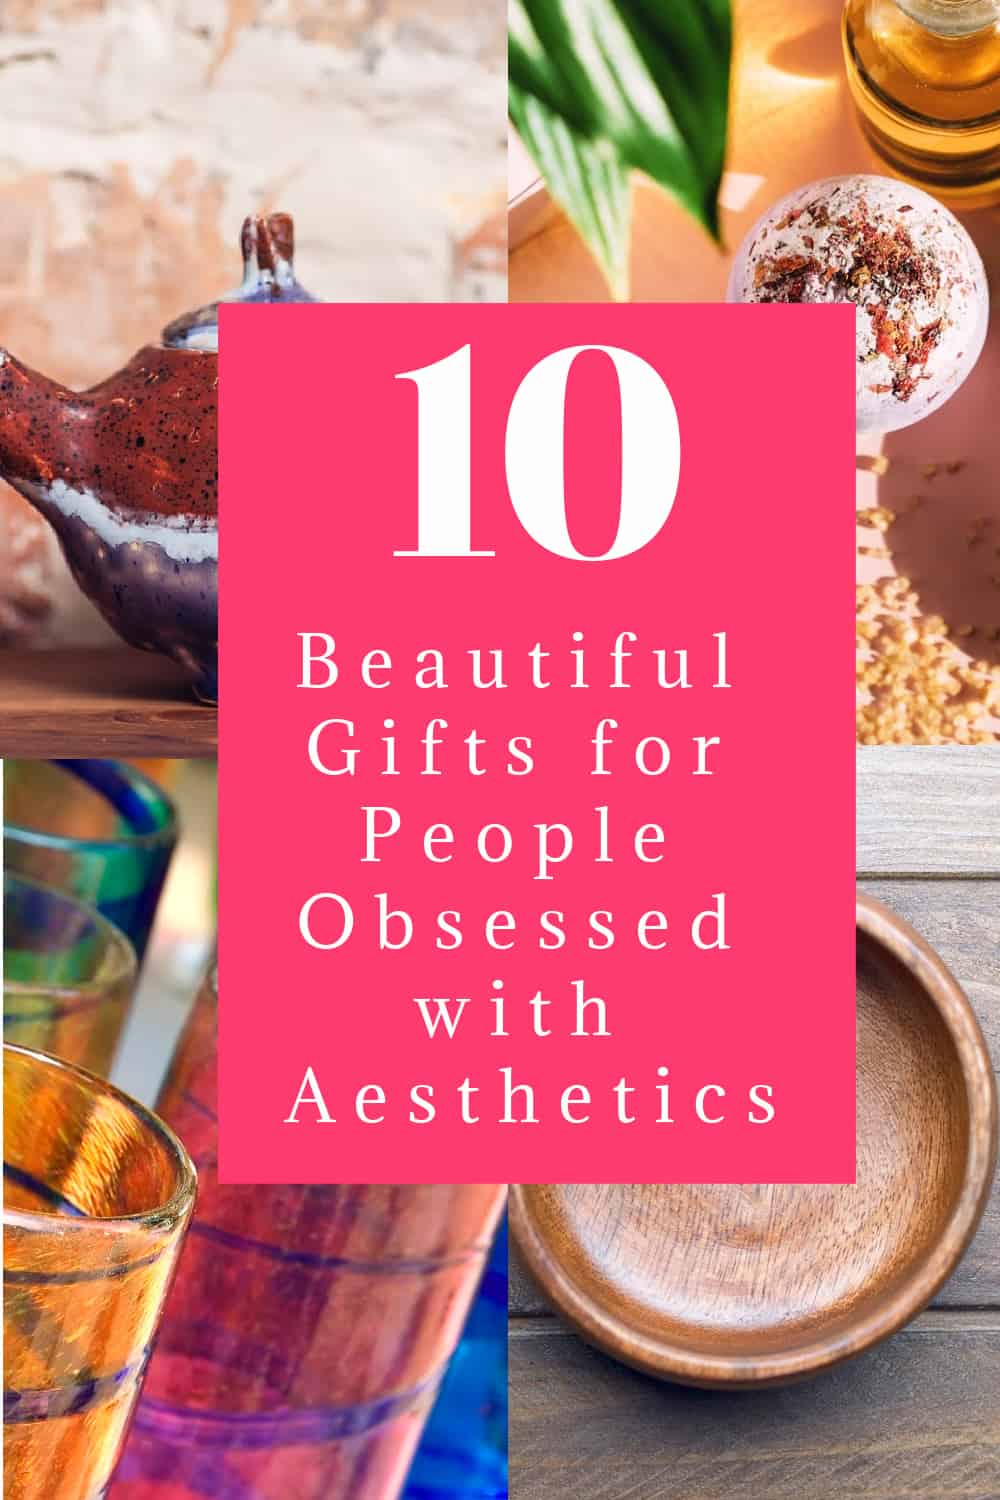 10 Purely Beautiful Gifts For People Obsessed With Aesthetics